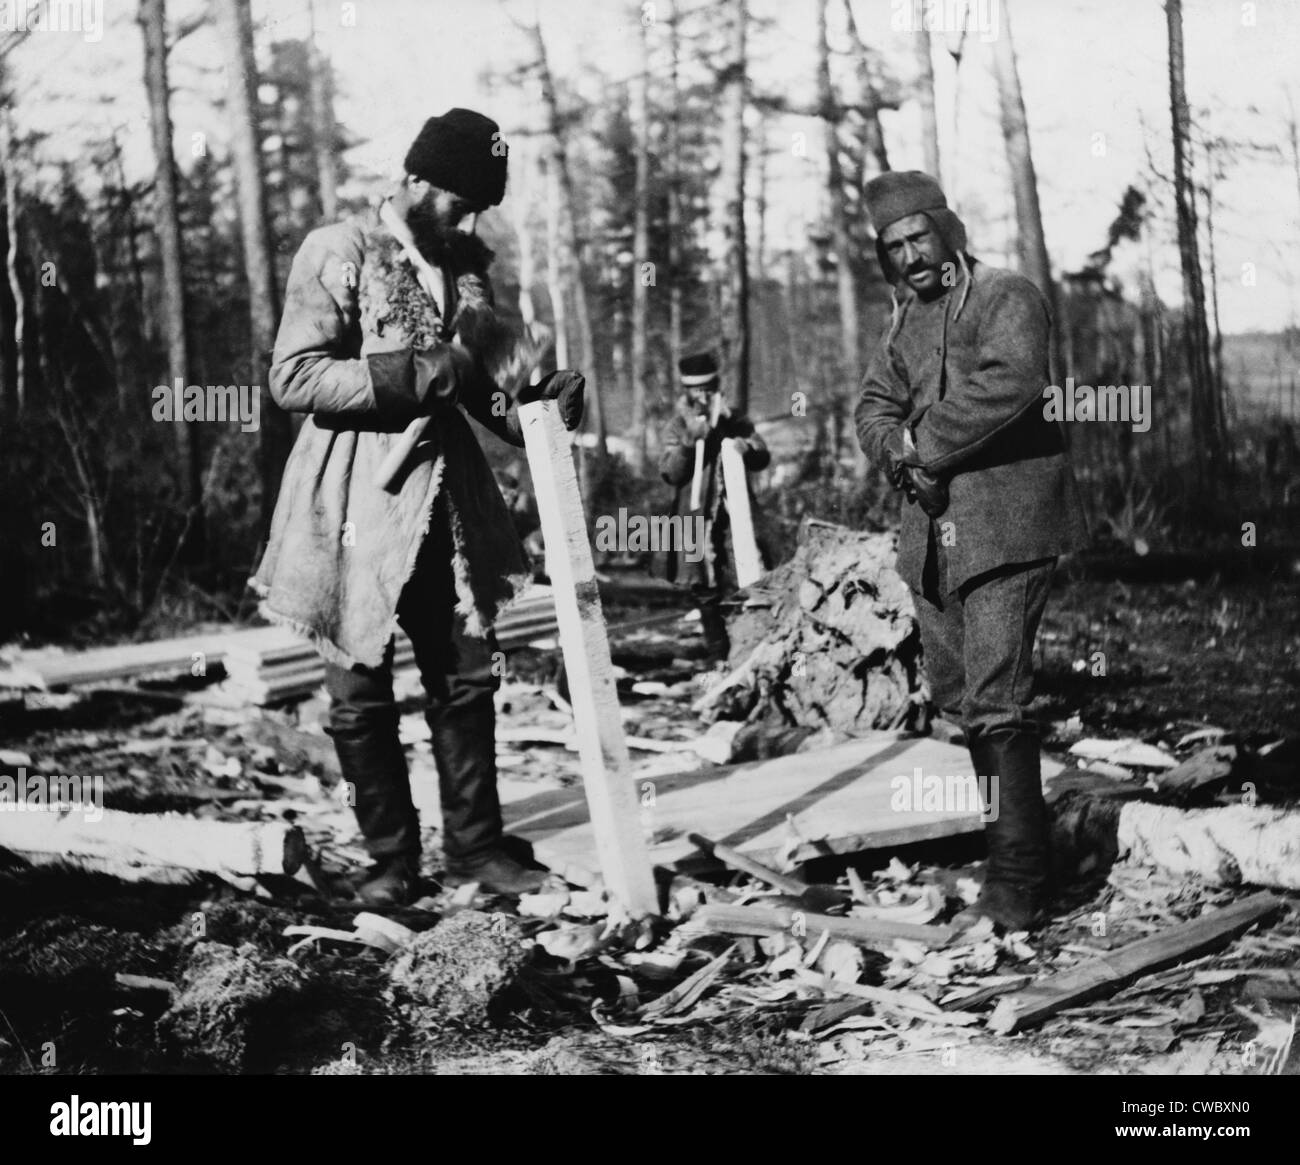 Three Russian convicts building a camp near the Eastern Siberian Railroad. Throughout the 19th century, Russia populated its Stock Photo